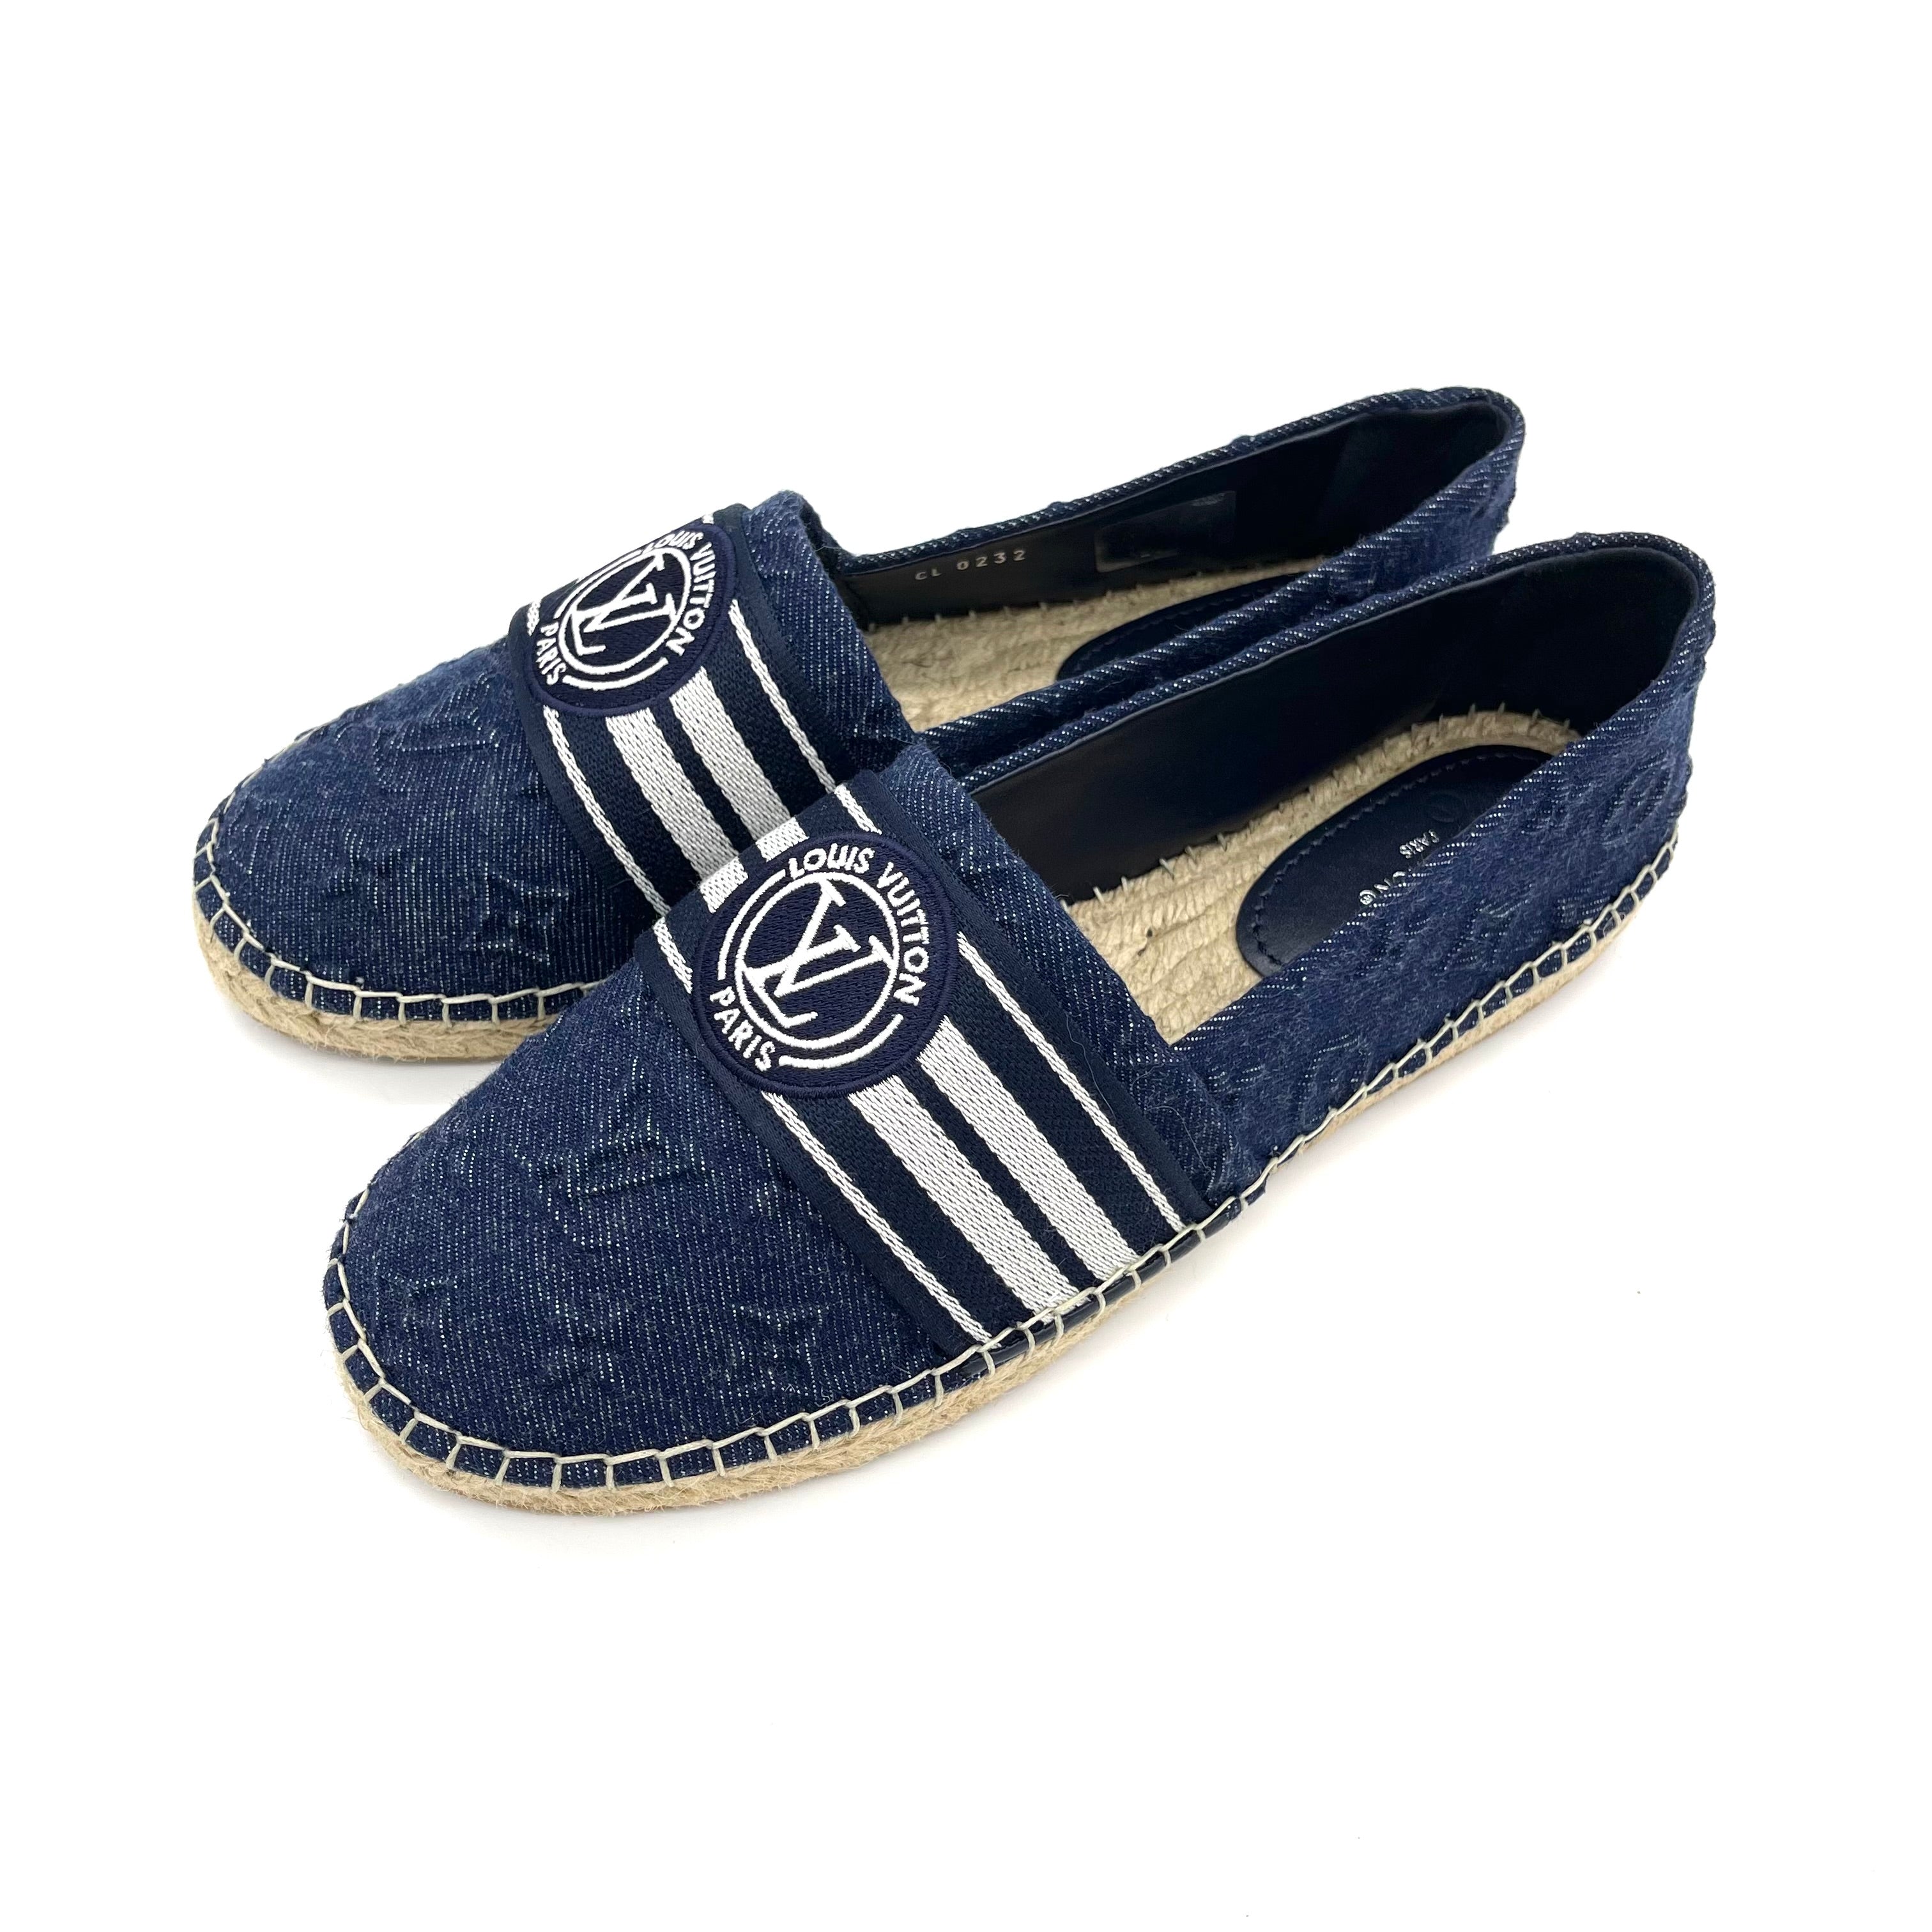 Louis Vuitton Starboard Flat Espadrille Size40 Brand new condition Never used